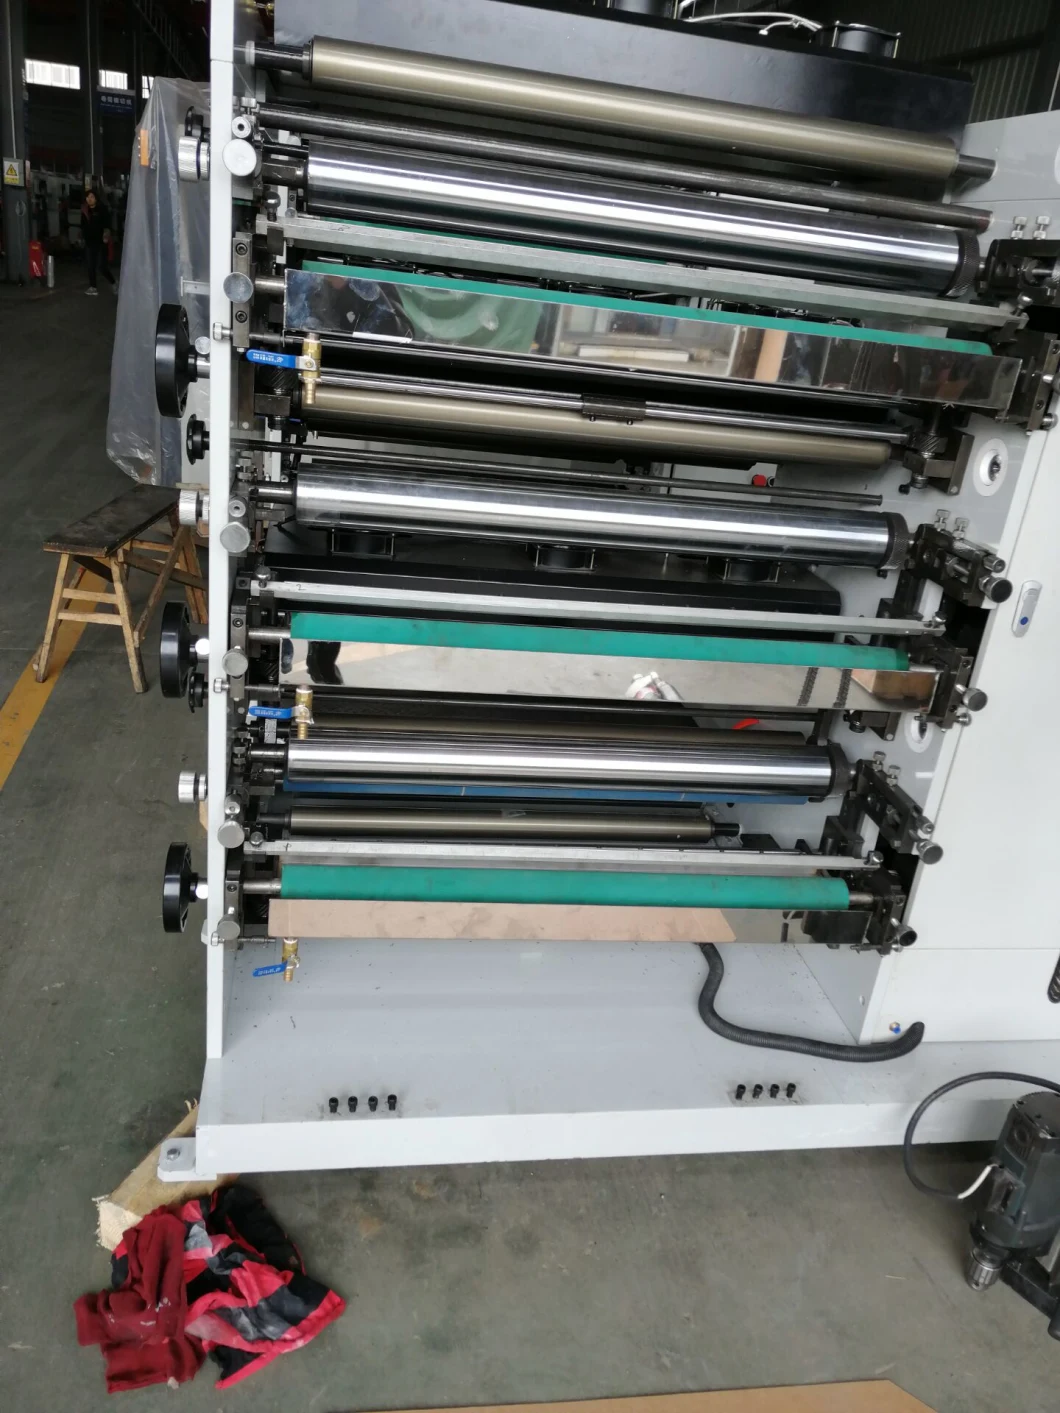 Automatic Coffee Disposable Paper Cup Box Bowl Bag Square Food Dinner Plates Plate and Fans Water Ink Forming Making Flexo Printer Punching Die Cutting Machine